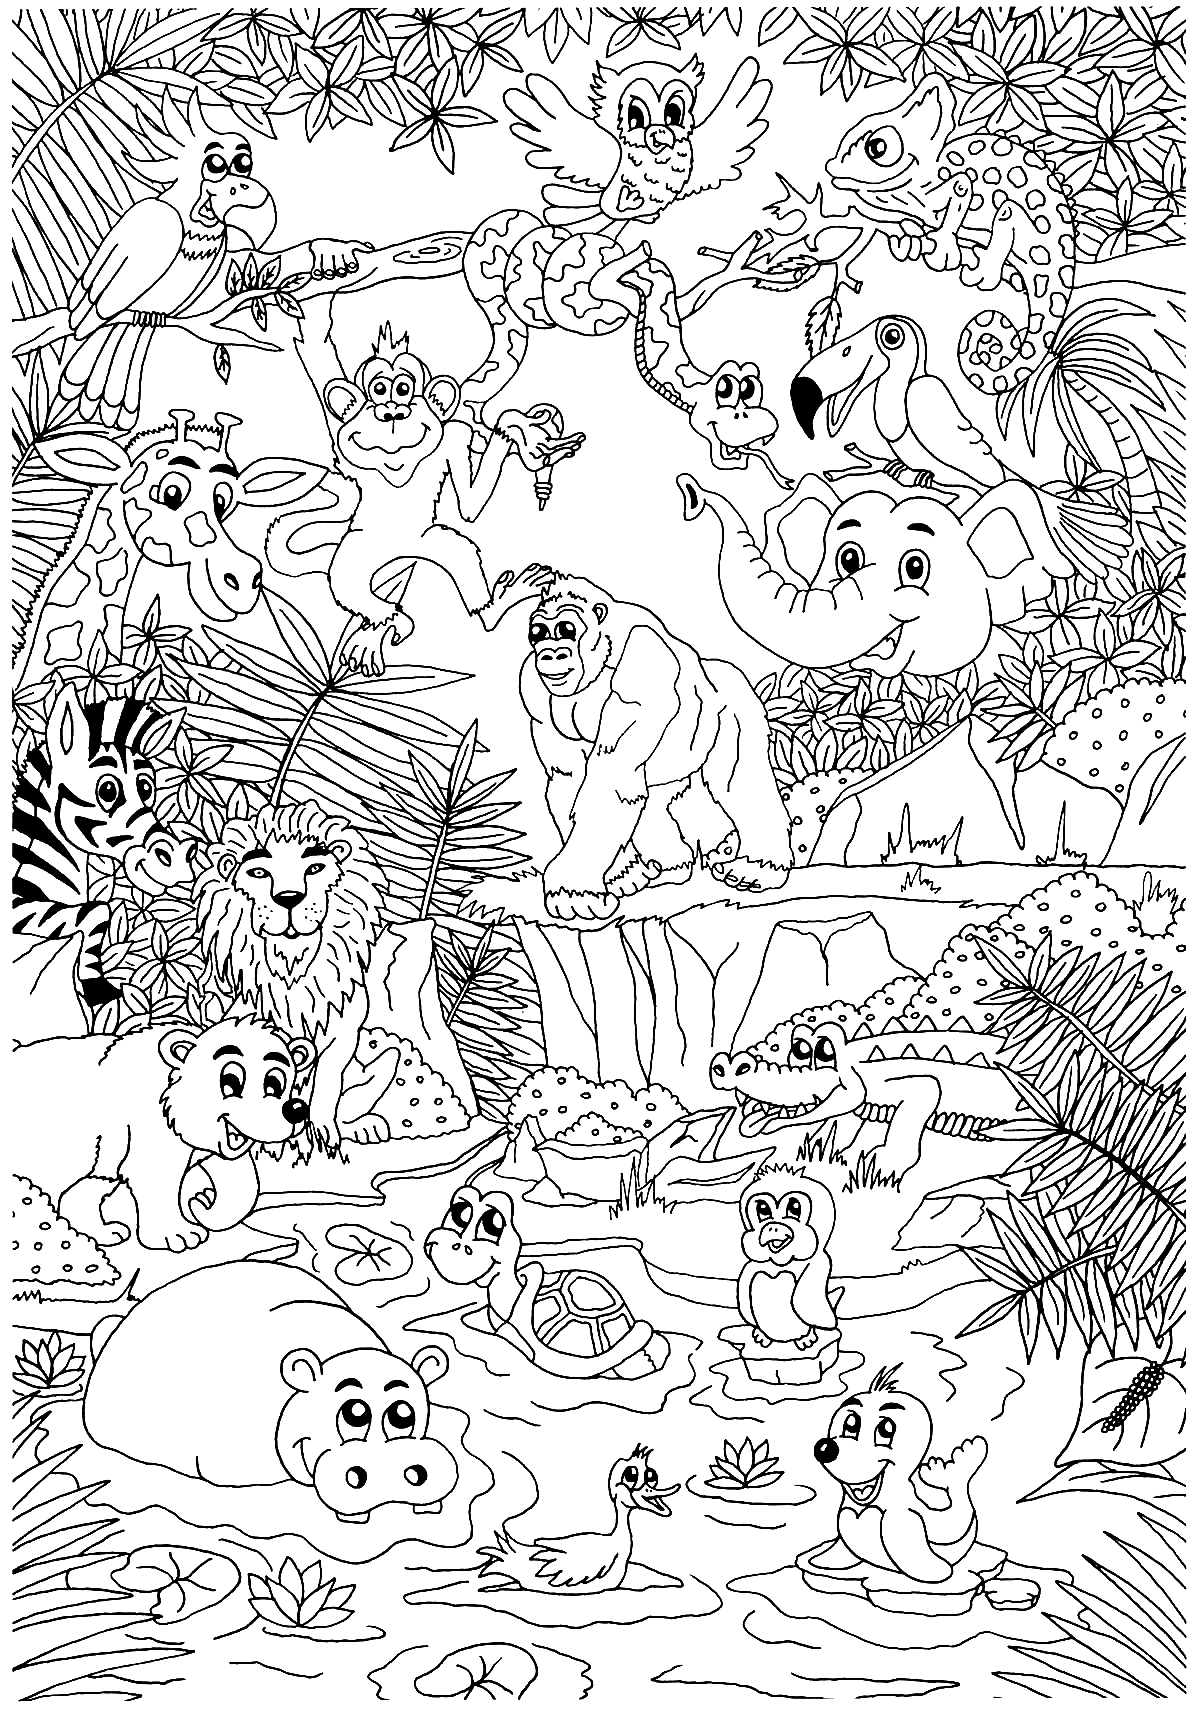 Many Jungle Animals Coloring Pages